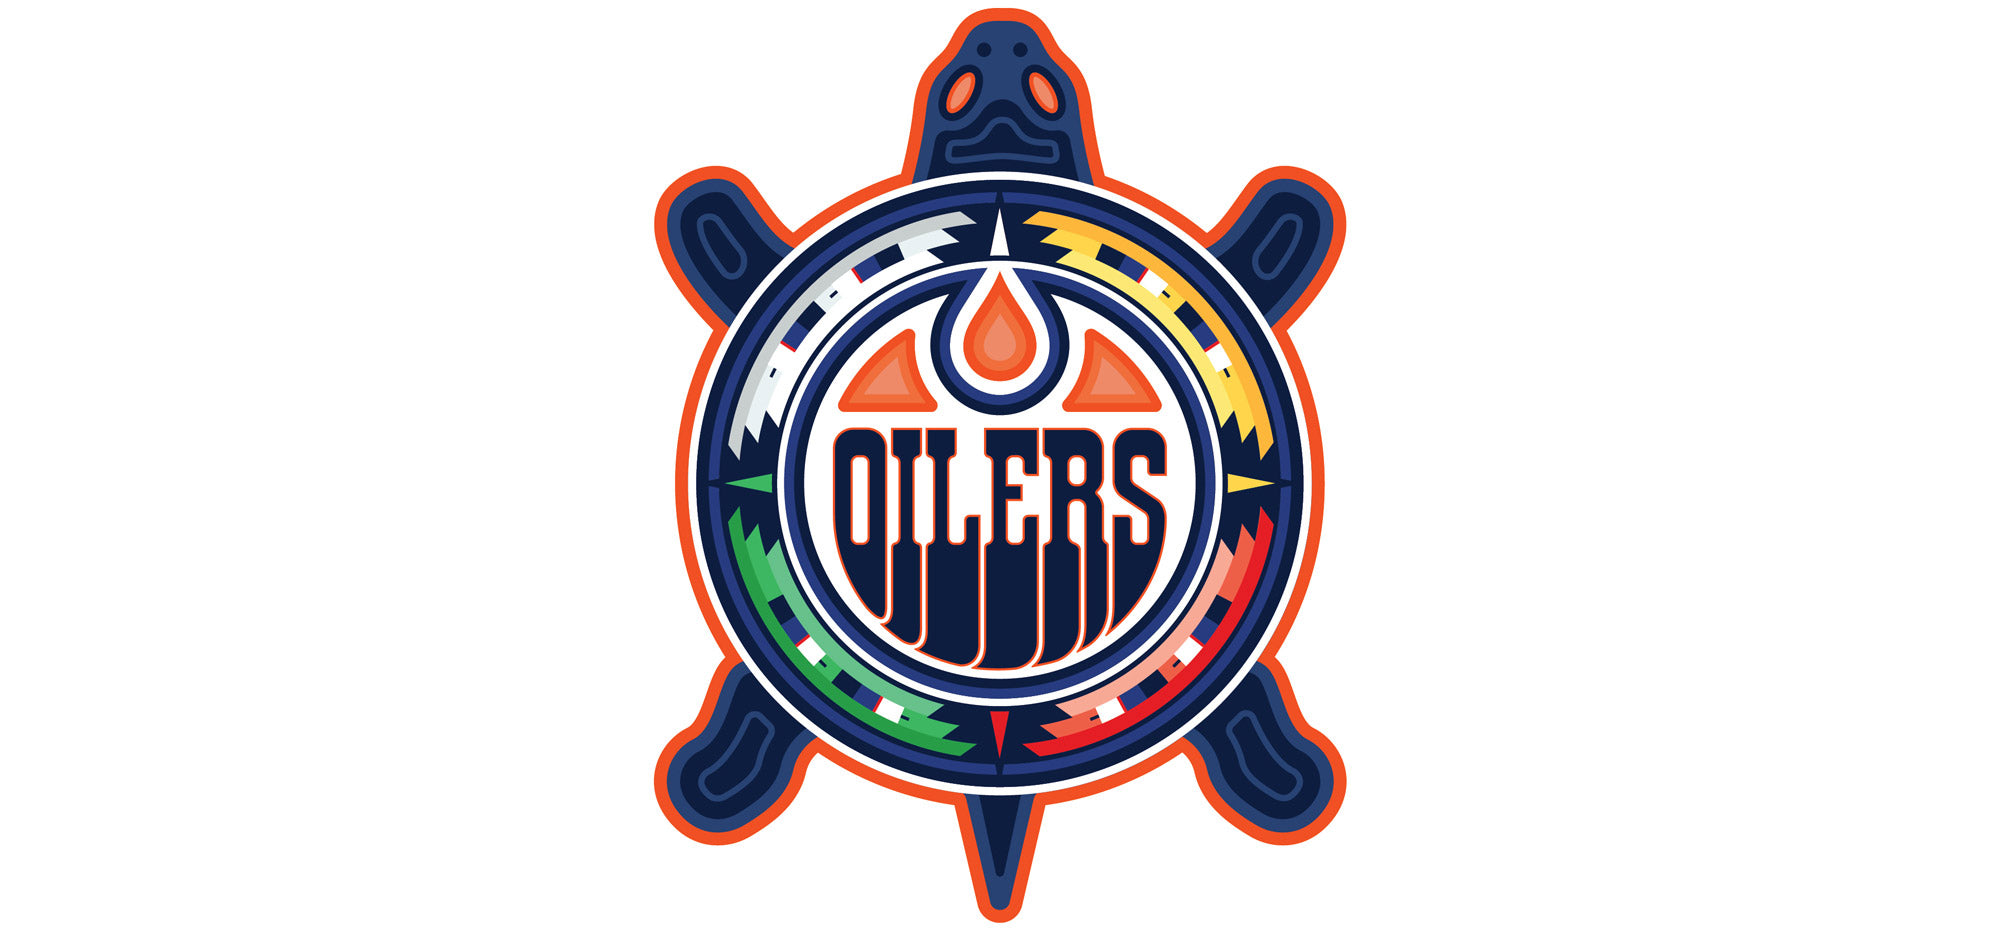 Edmonton Oilers] - A preview of our warmup jerseys for Indigenous